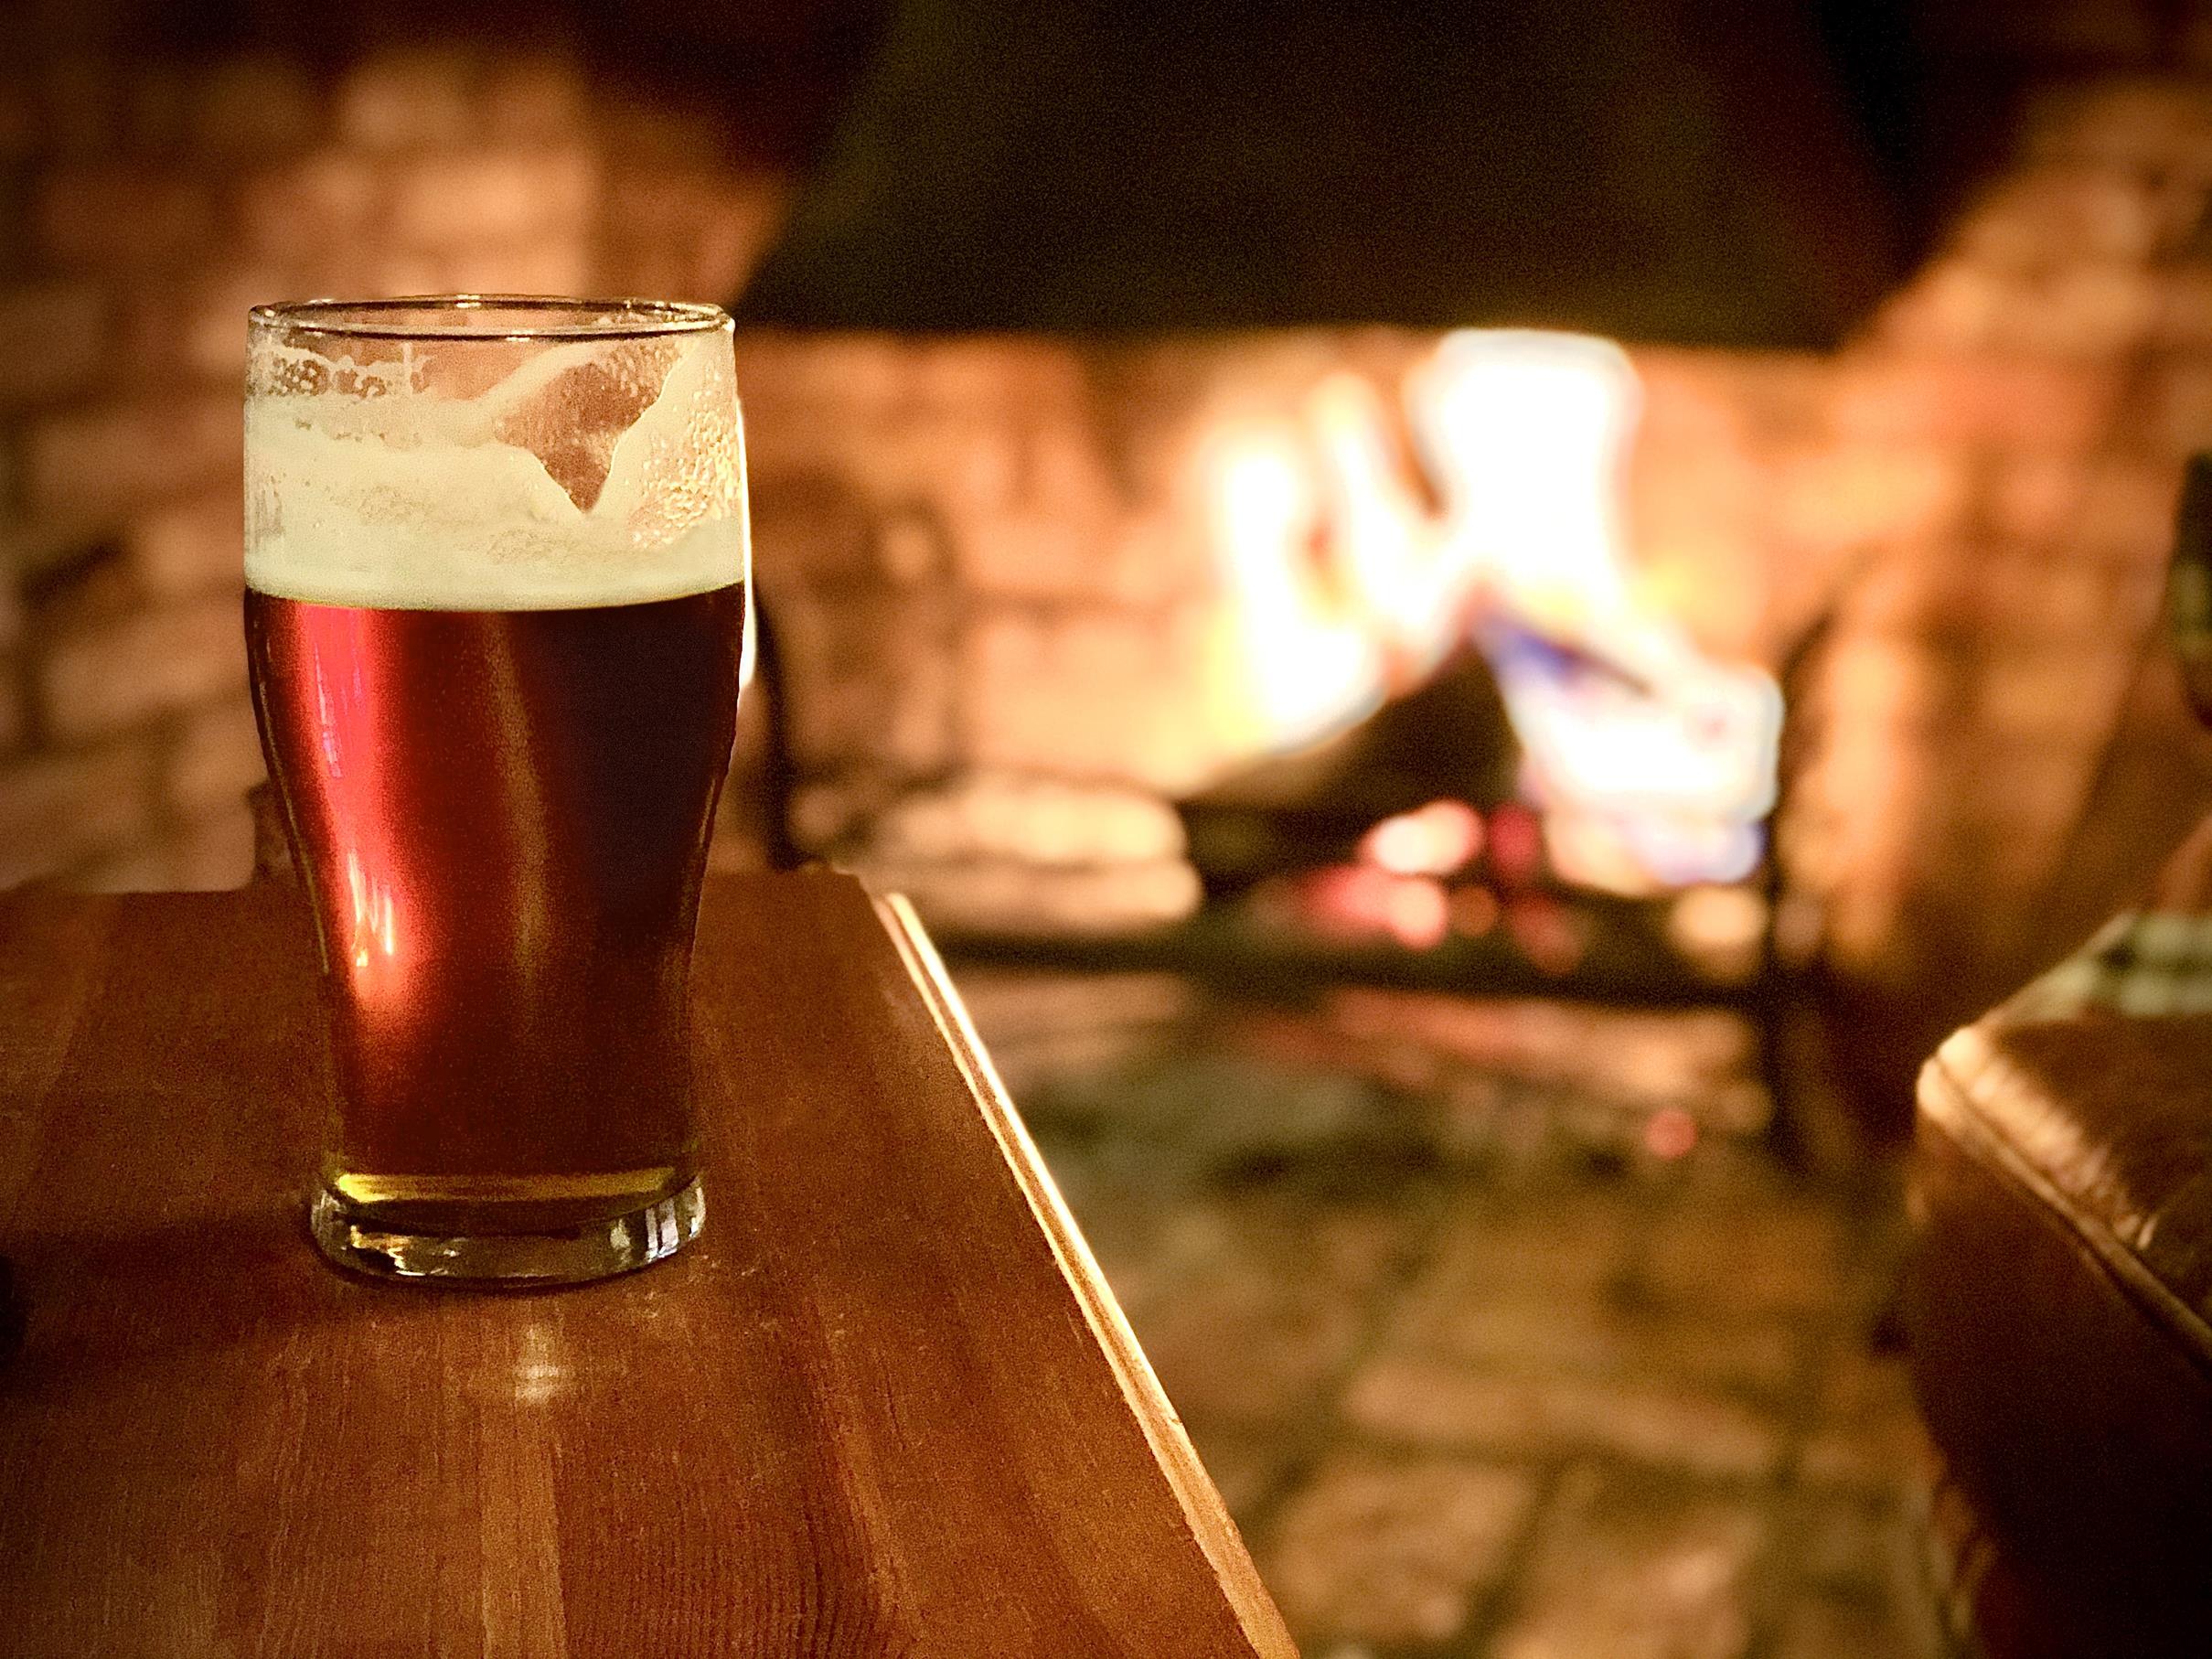 a glass of beer illuminated by the fire in the background